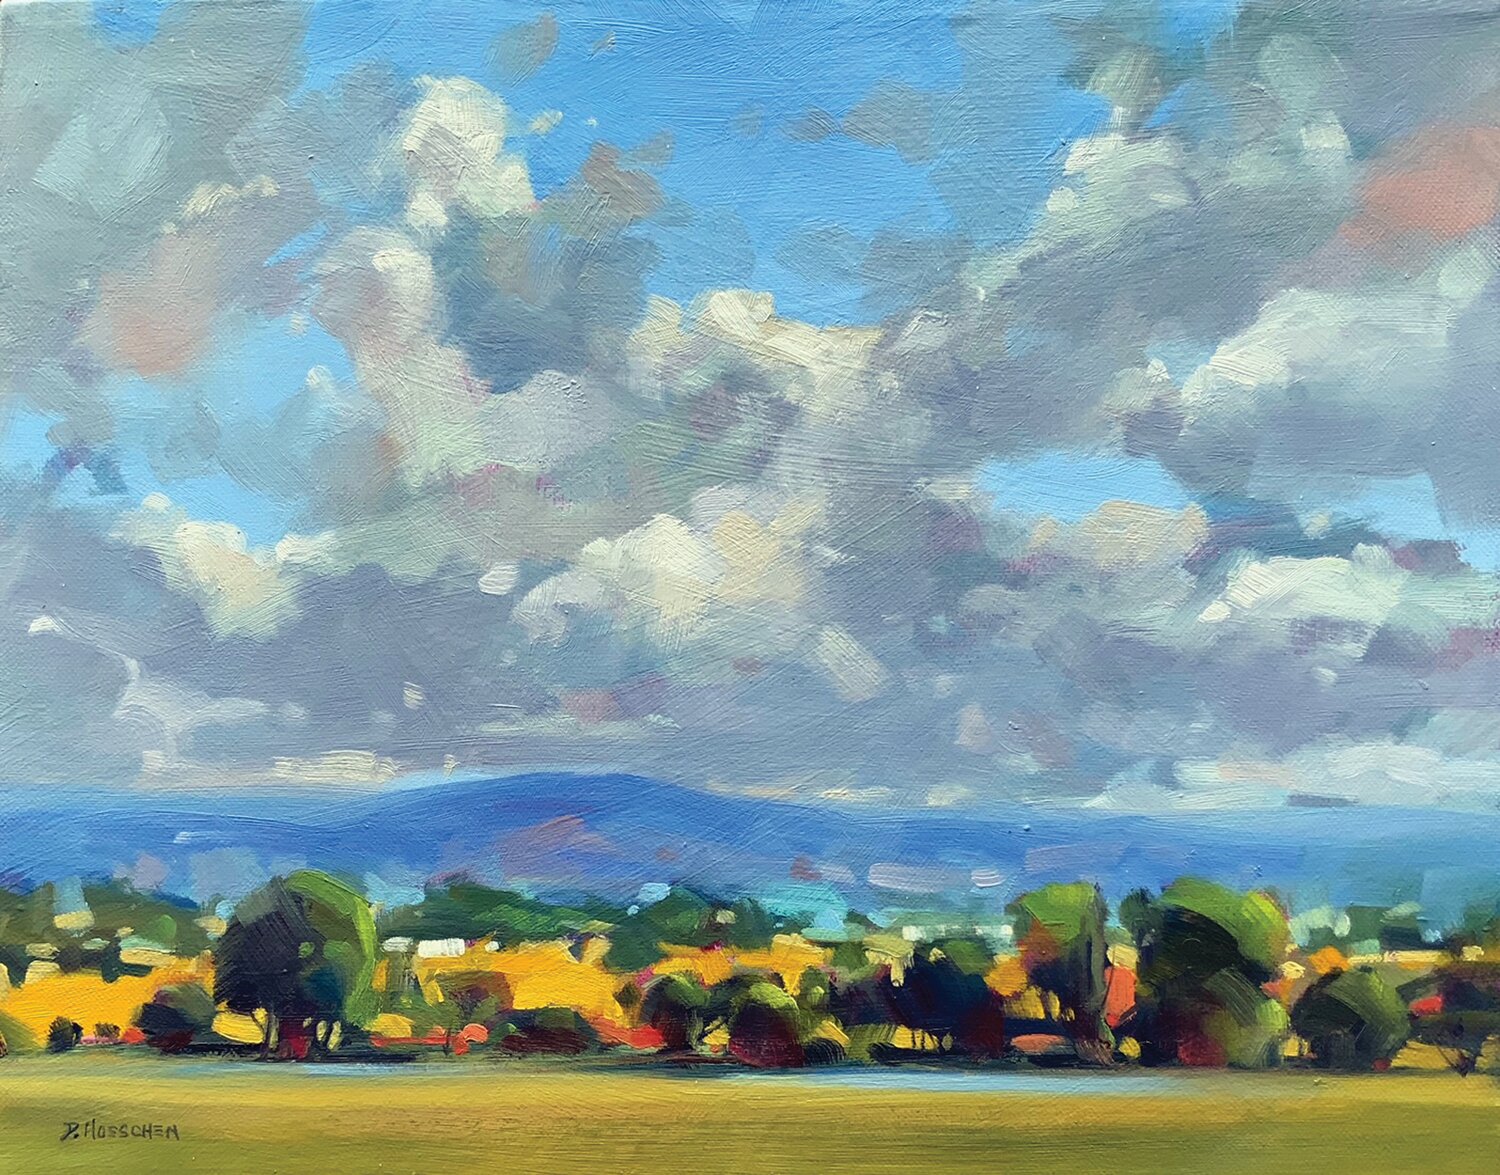 “Summer Atmospherics” is an oil painting by Dorothy Hoeschen.